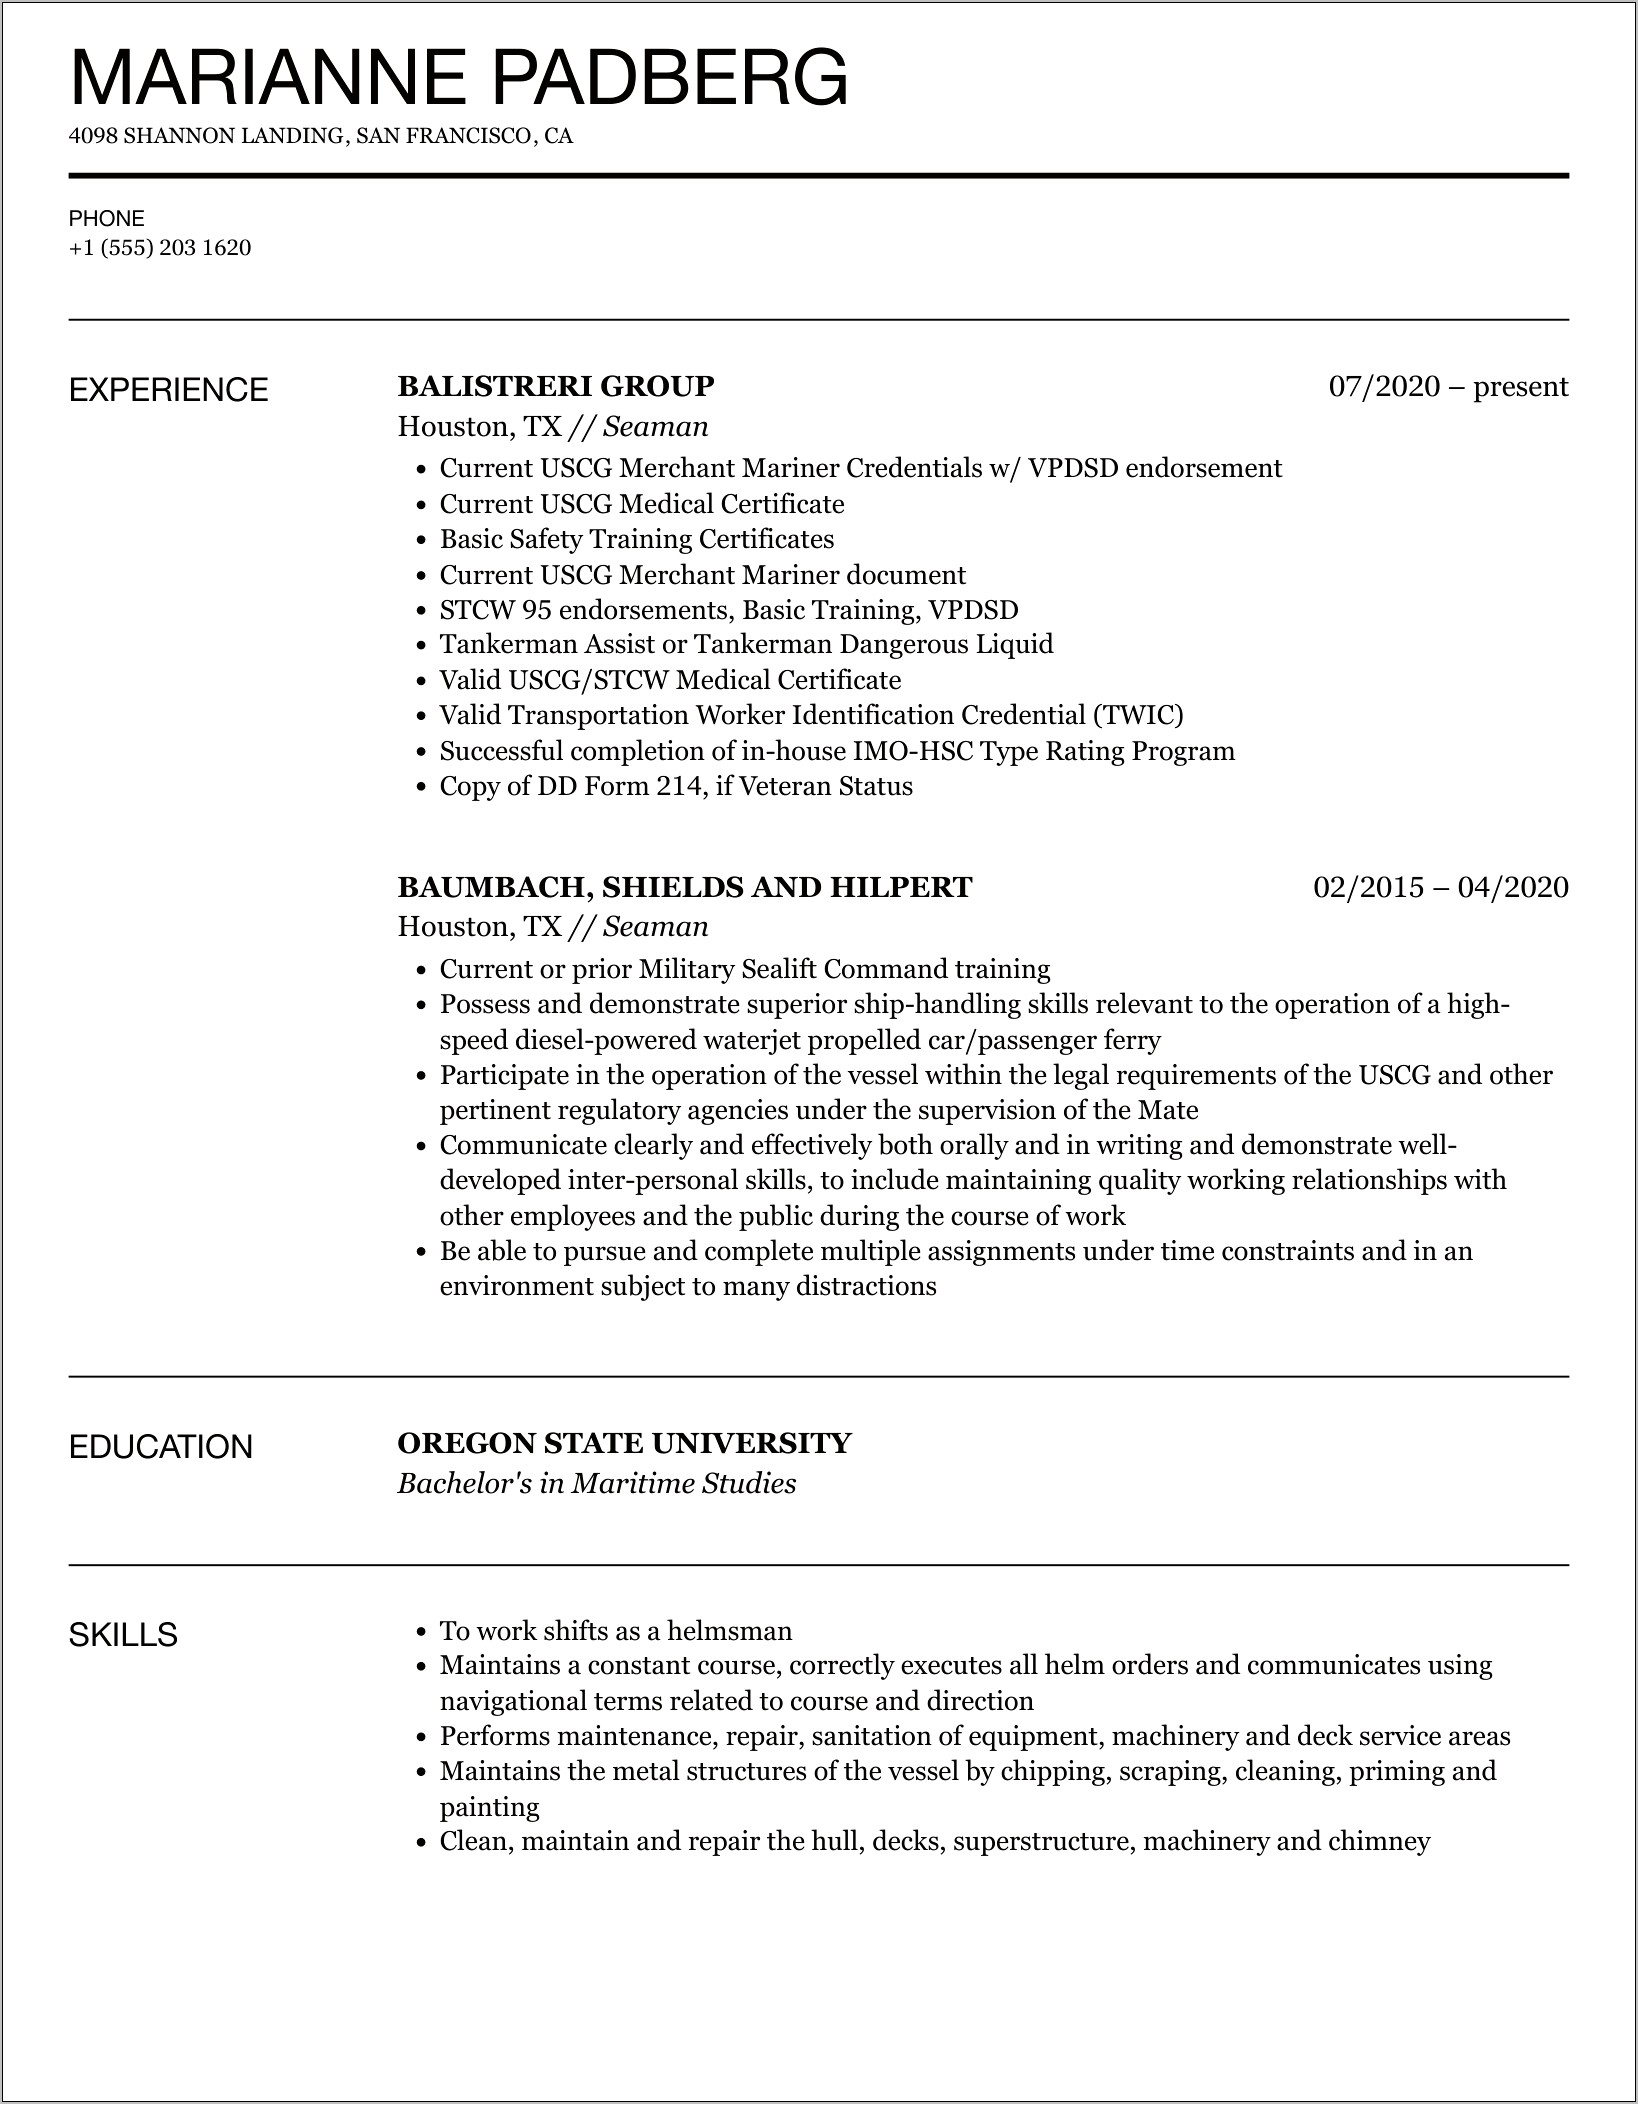 Sample Resume With Passport Details